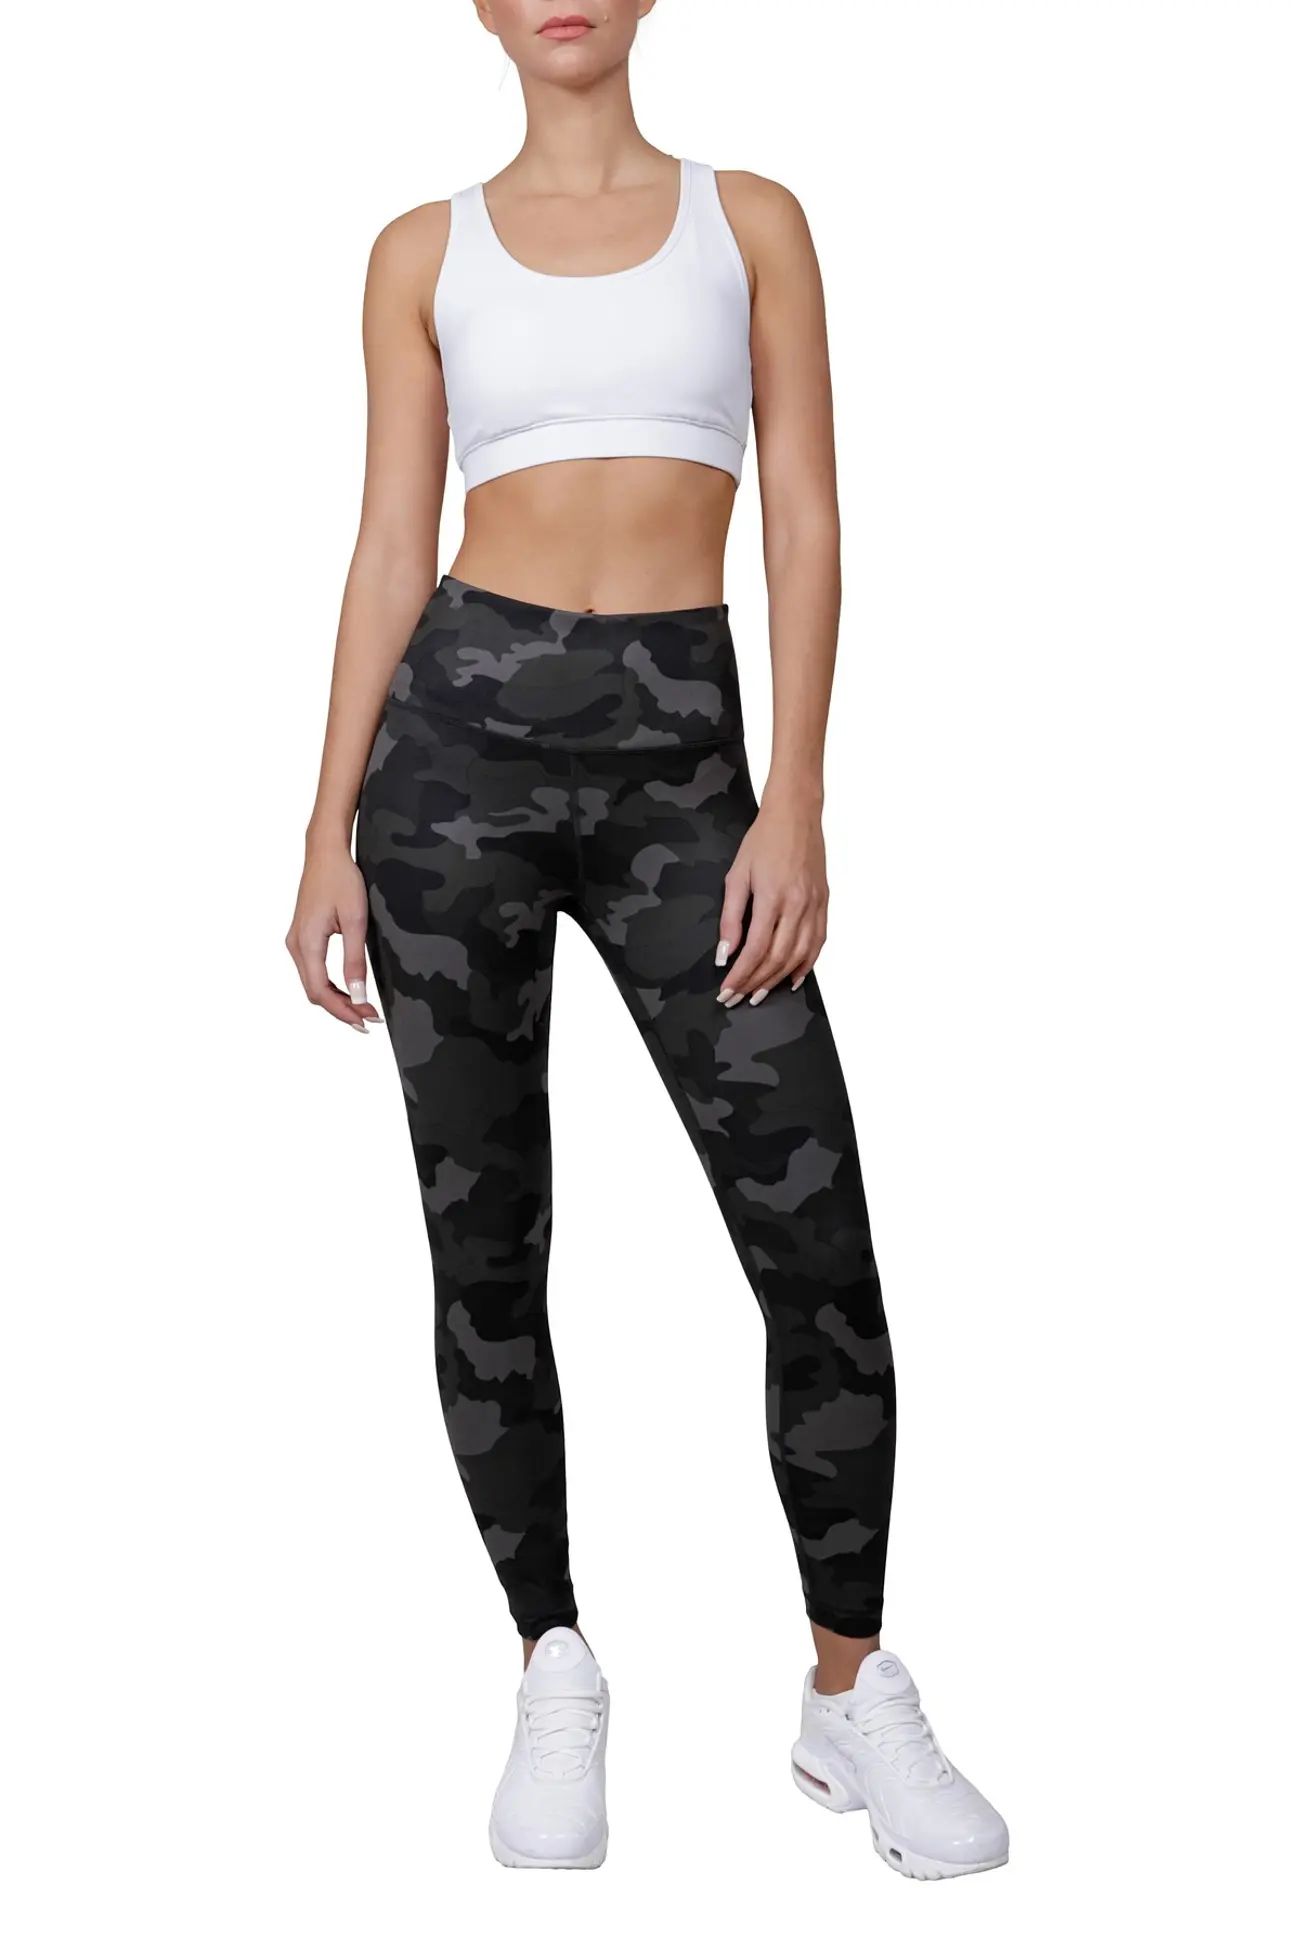 90 Degree By Reflex | Lux Camo High Waisted Ankle Leggings | Nordstrom Rack | Nordstrom Rack